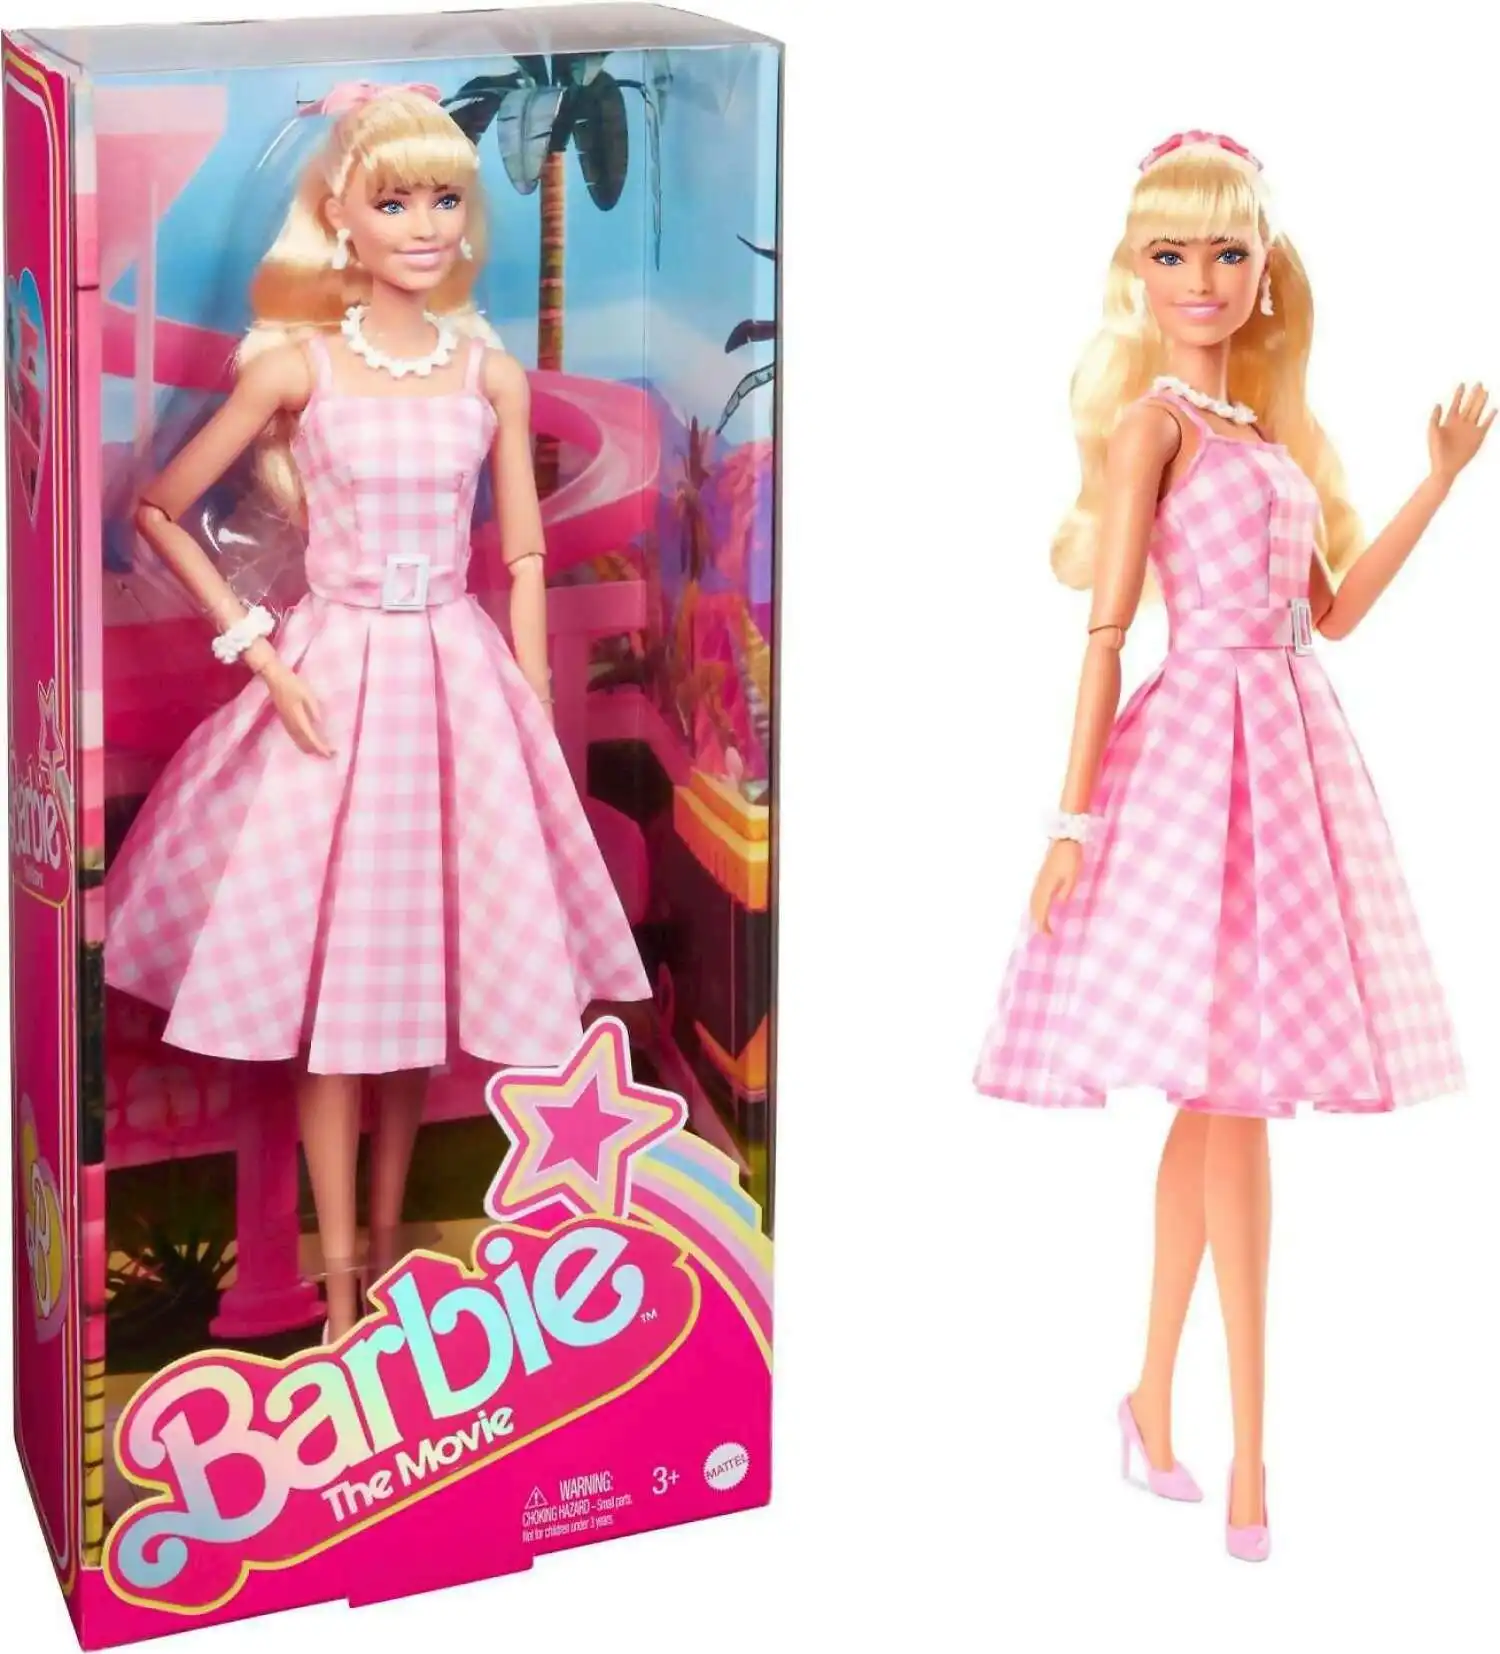 Barbie - Barbie The Movie Collectible Doll Margot Robbie As Barbie In Pink Gingham Dress - Mattel